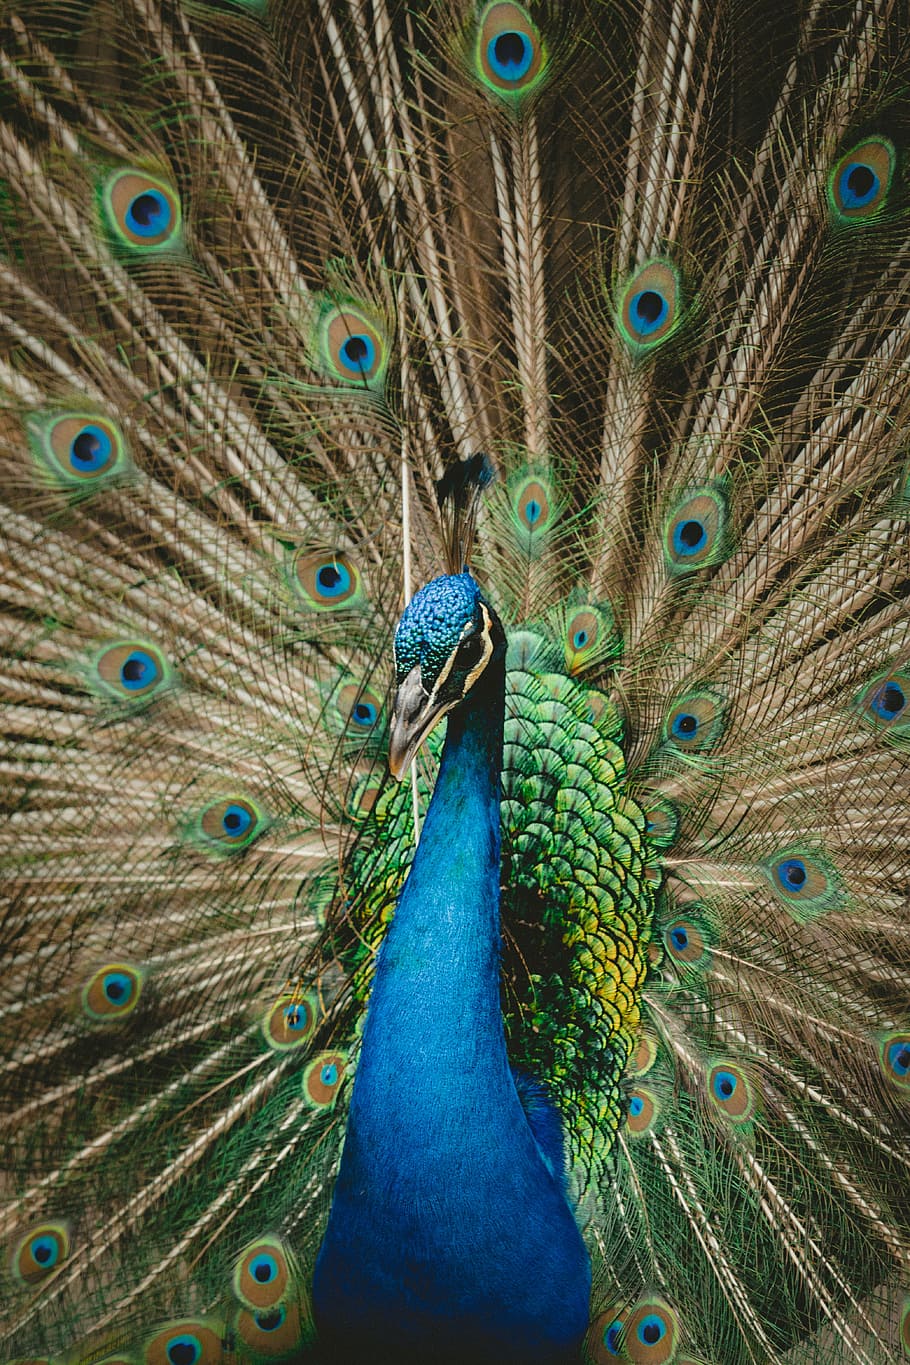 green and blue peacock spreading wings, selective focus photography of peacock